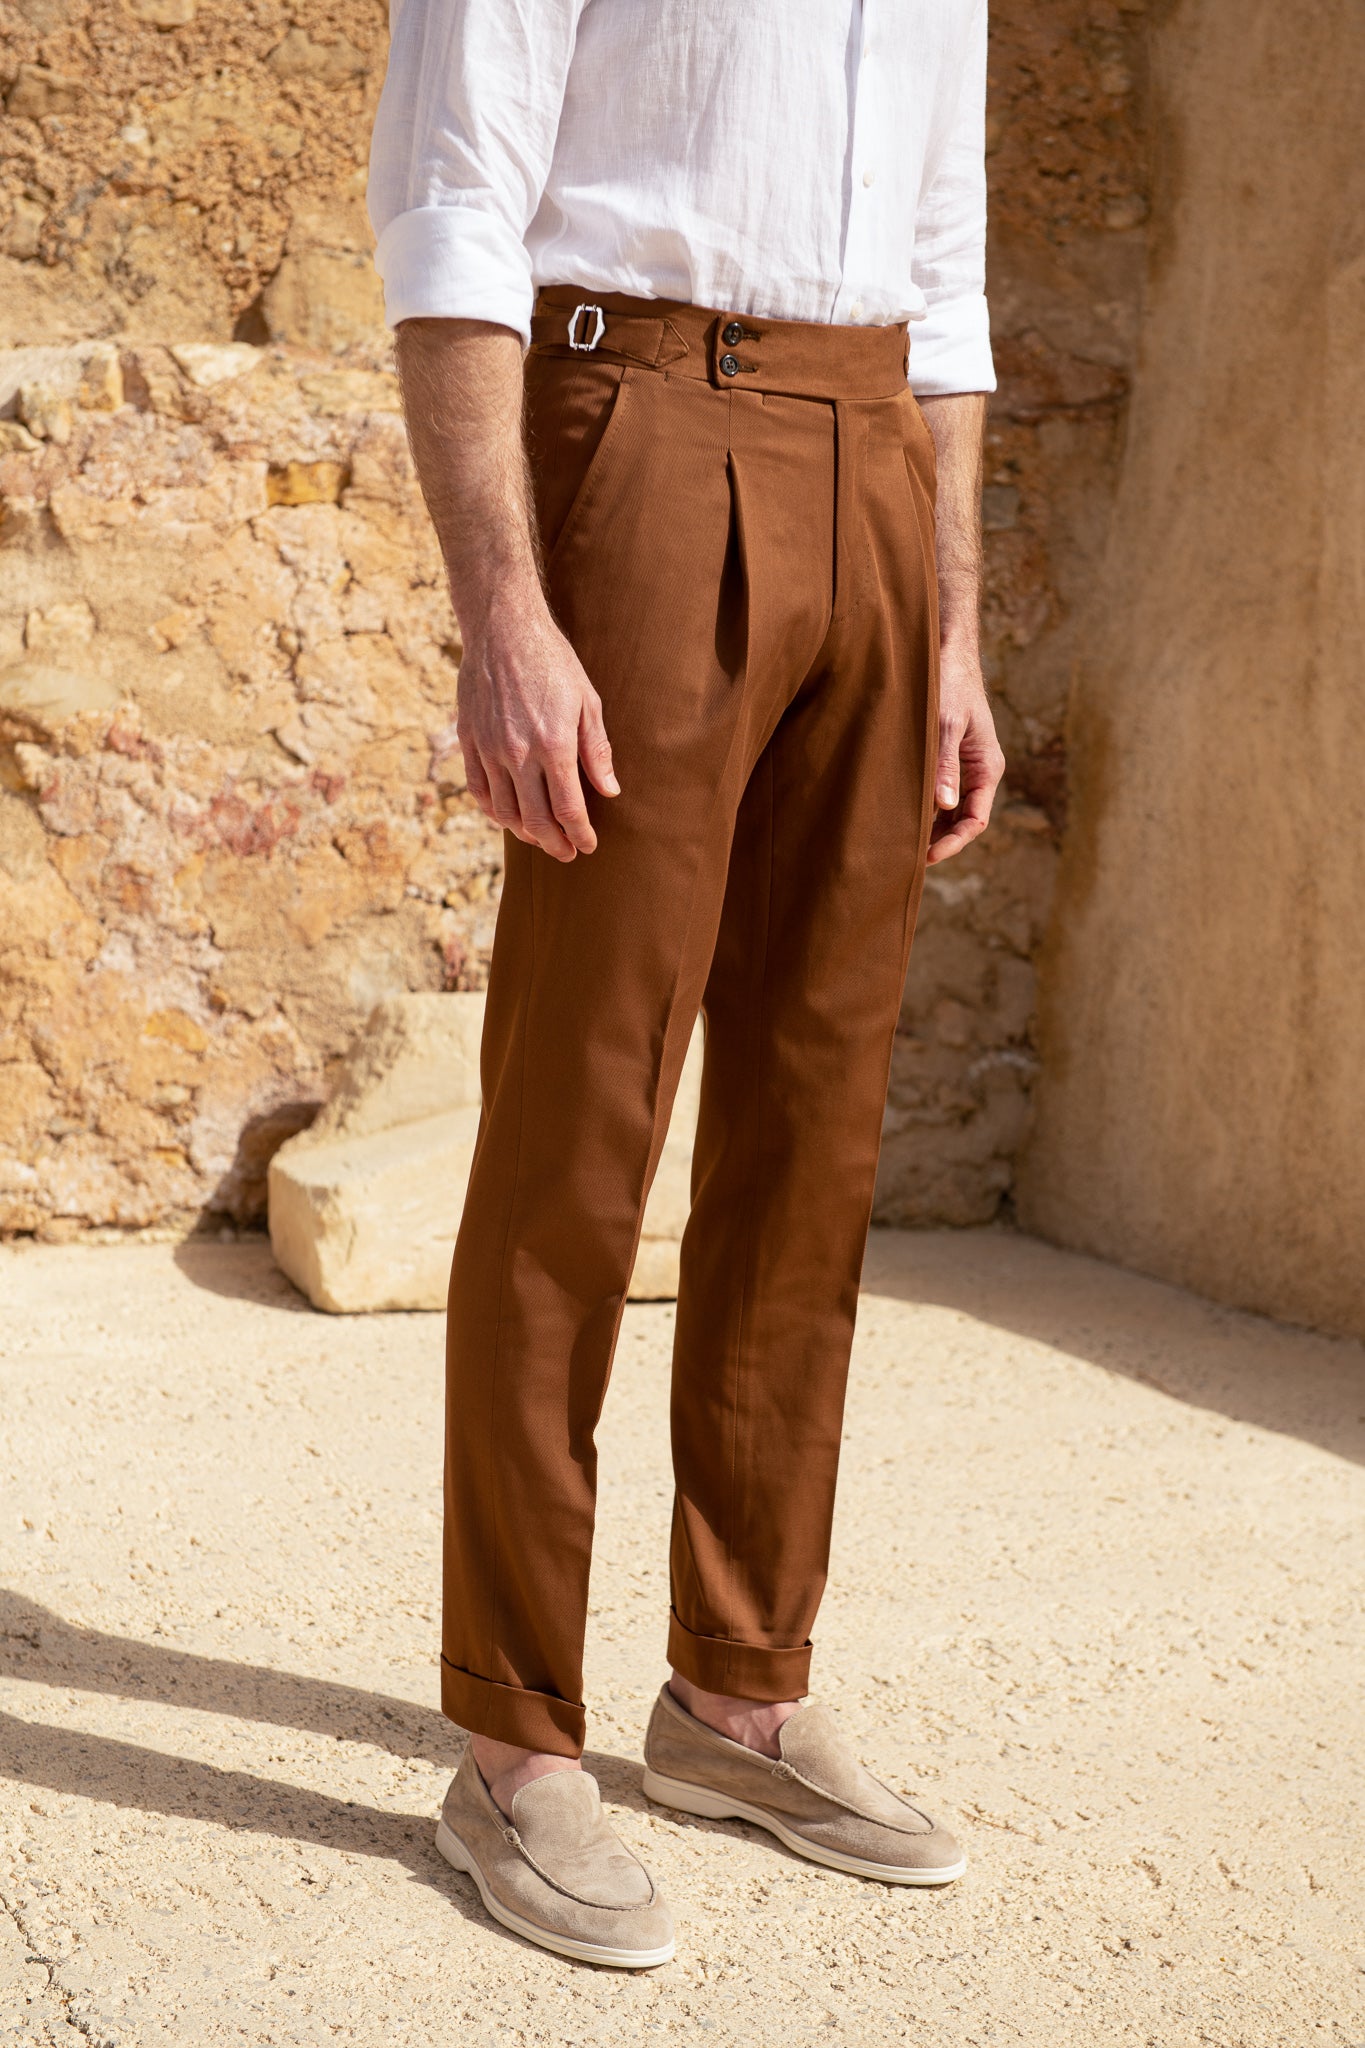 Cognac cotton trousers "Soragna Capsule Collection" - Made in Italy